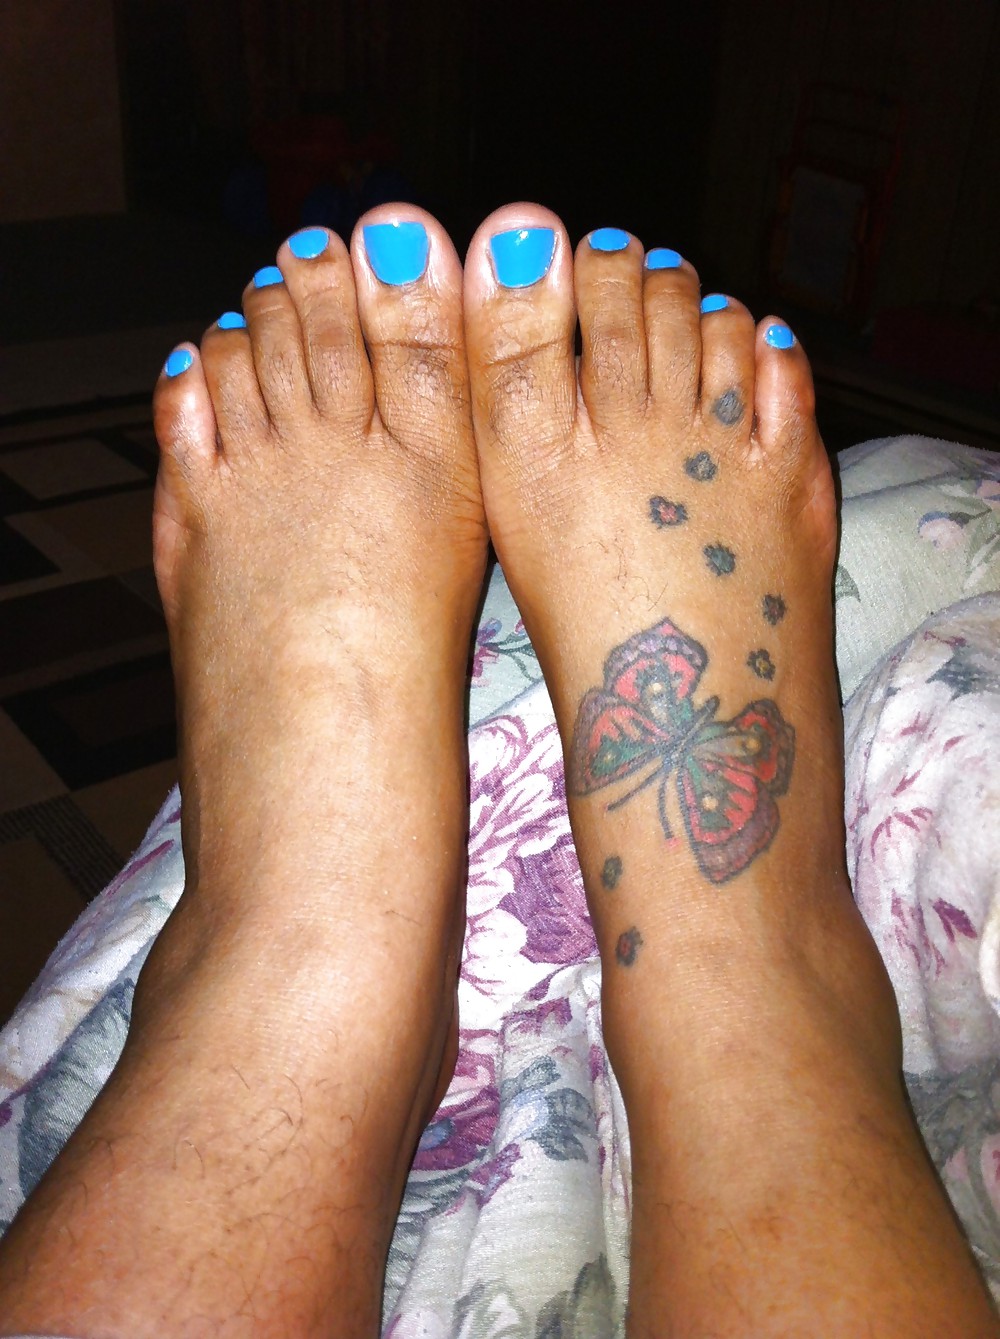 New Blue Painted Toes from a Freind #19895054